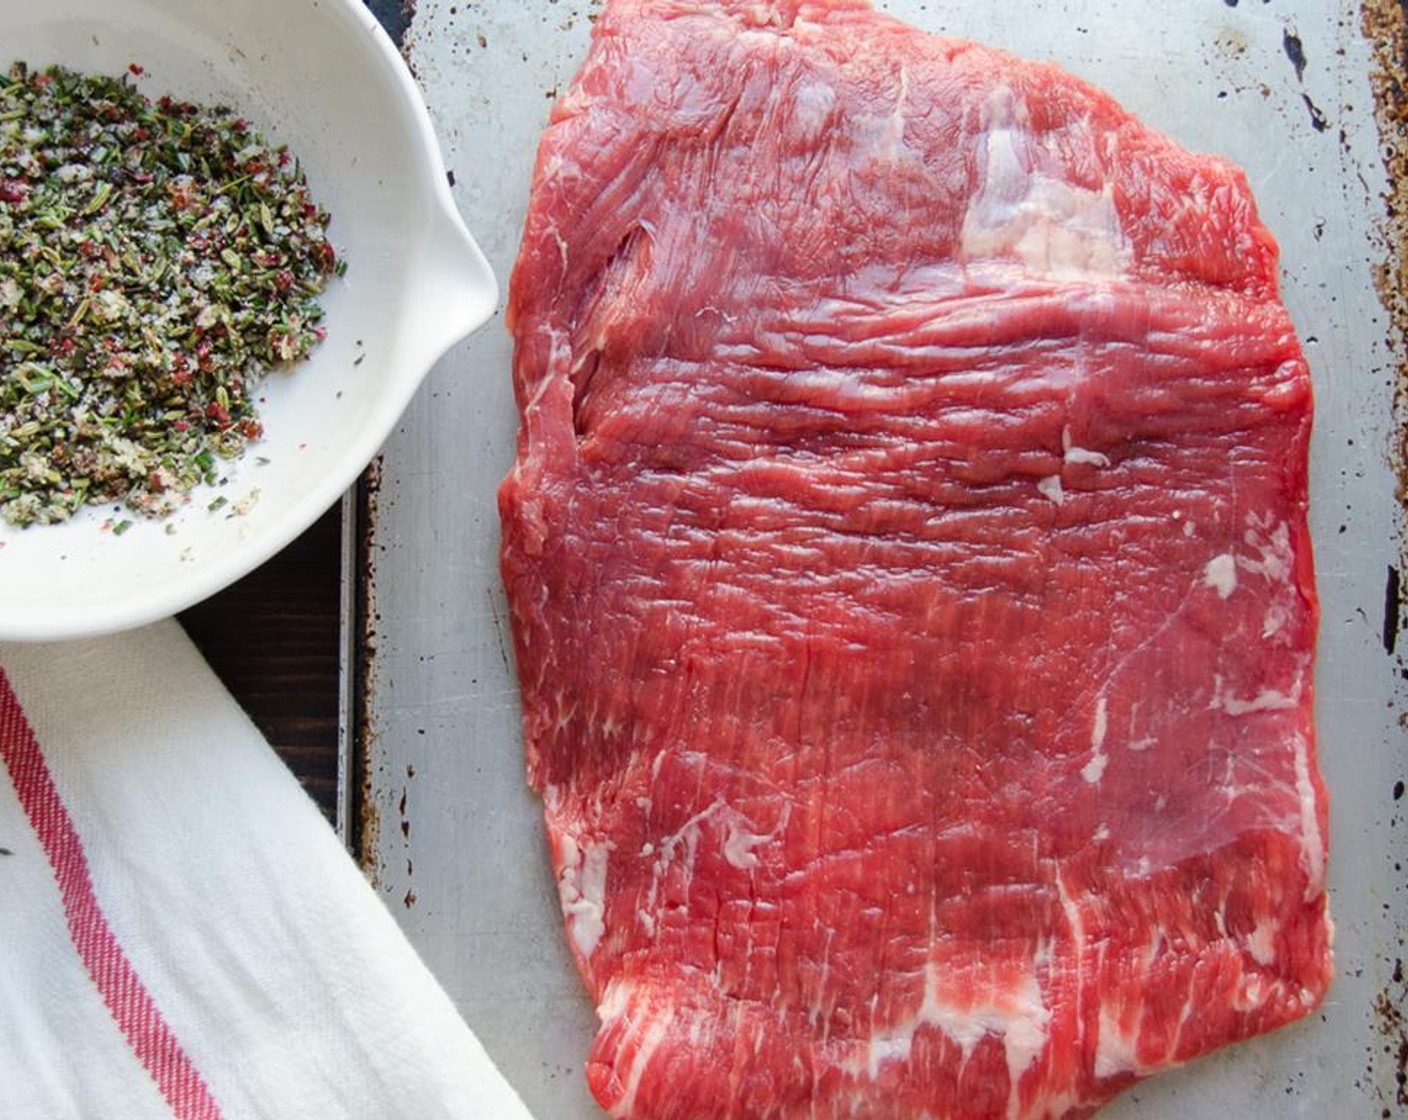 step 4 Place the Flank Steak (1.5 lb) on a platter or rimmed baking sheet. Rub half of the Olive Oil (1/2 Tbsp) over one side of the steak.